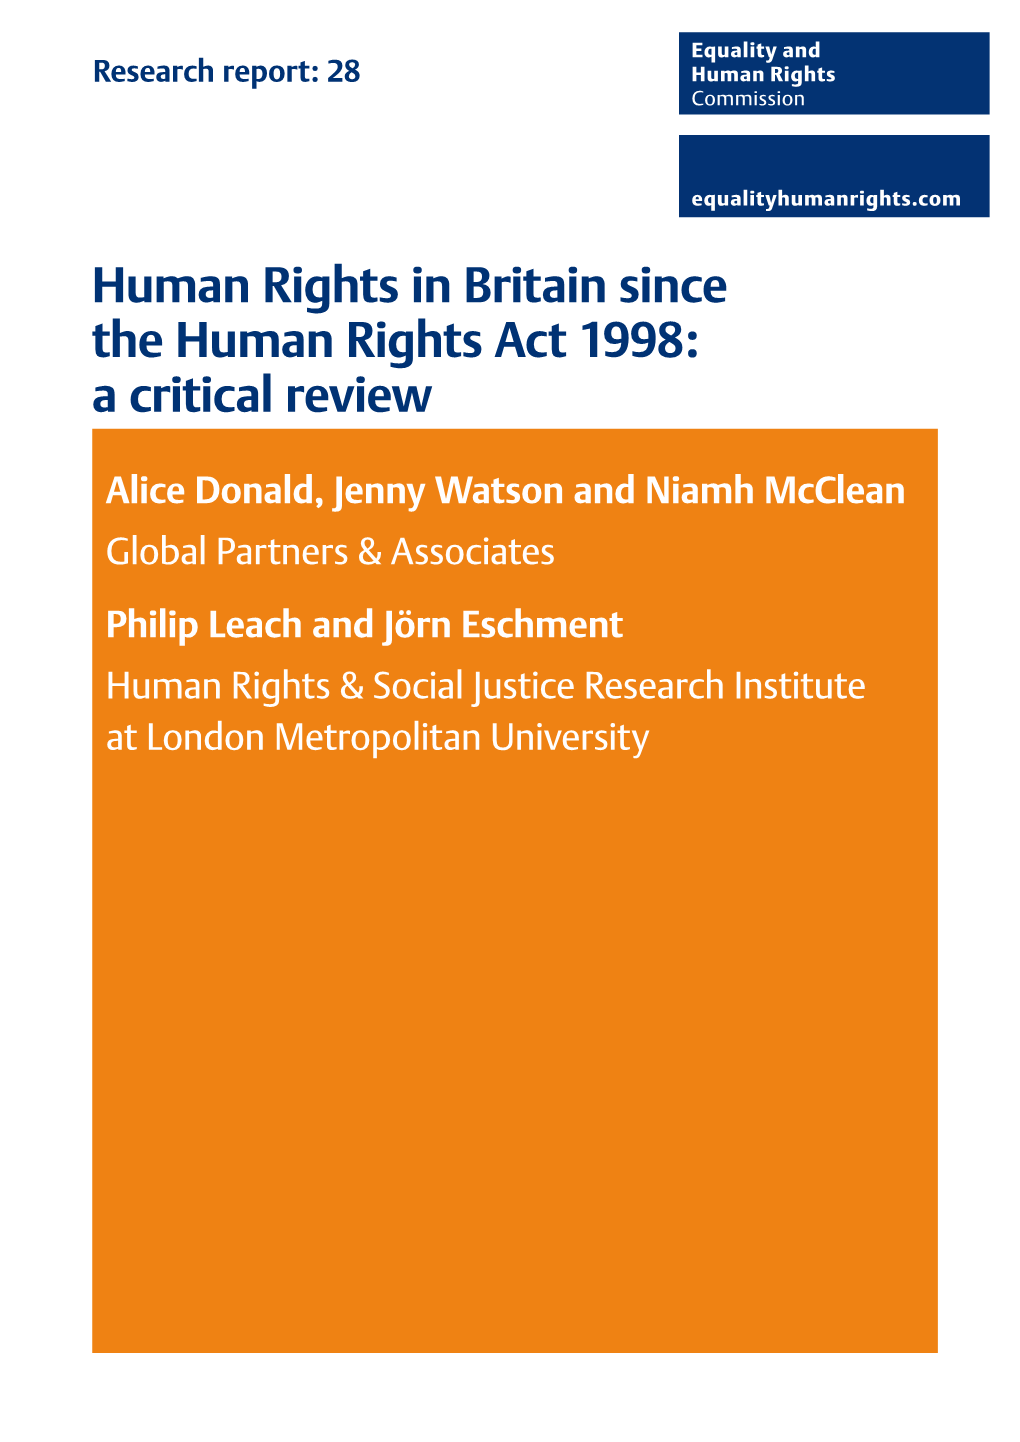 Human Rights in Britain Since the Human Rights Act 1998: a Critical Review